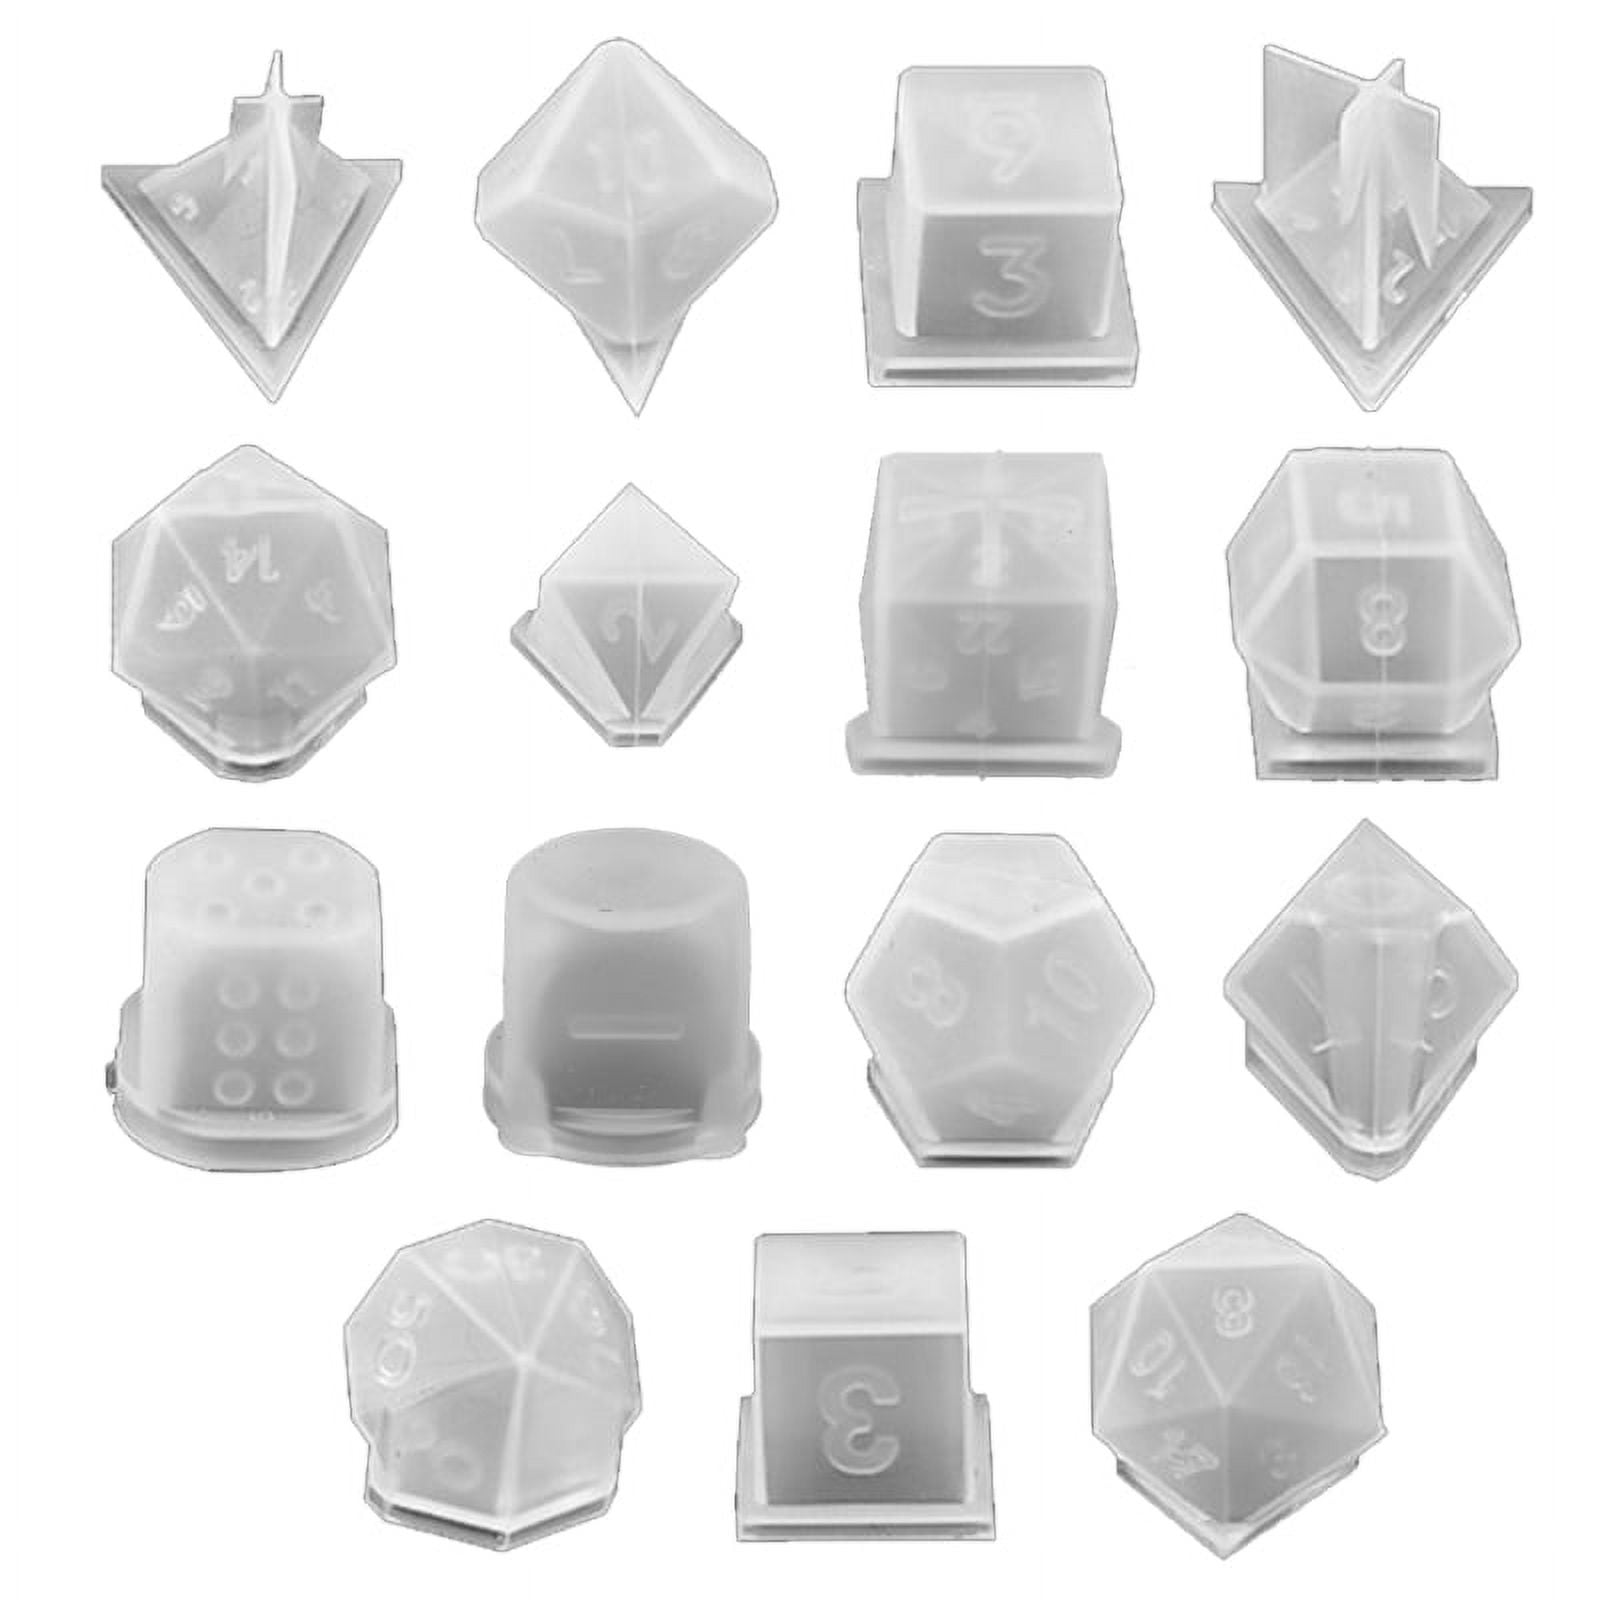 ZUARFY 15 Shapes Irregular Dice Epoxy Resin Mold DIY Crafts Casting Tools  Multi-spec Digital Game Silicone Mould 